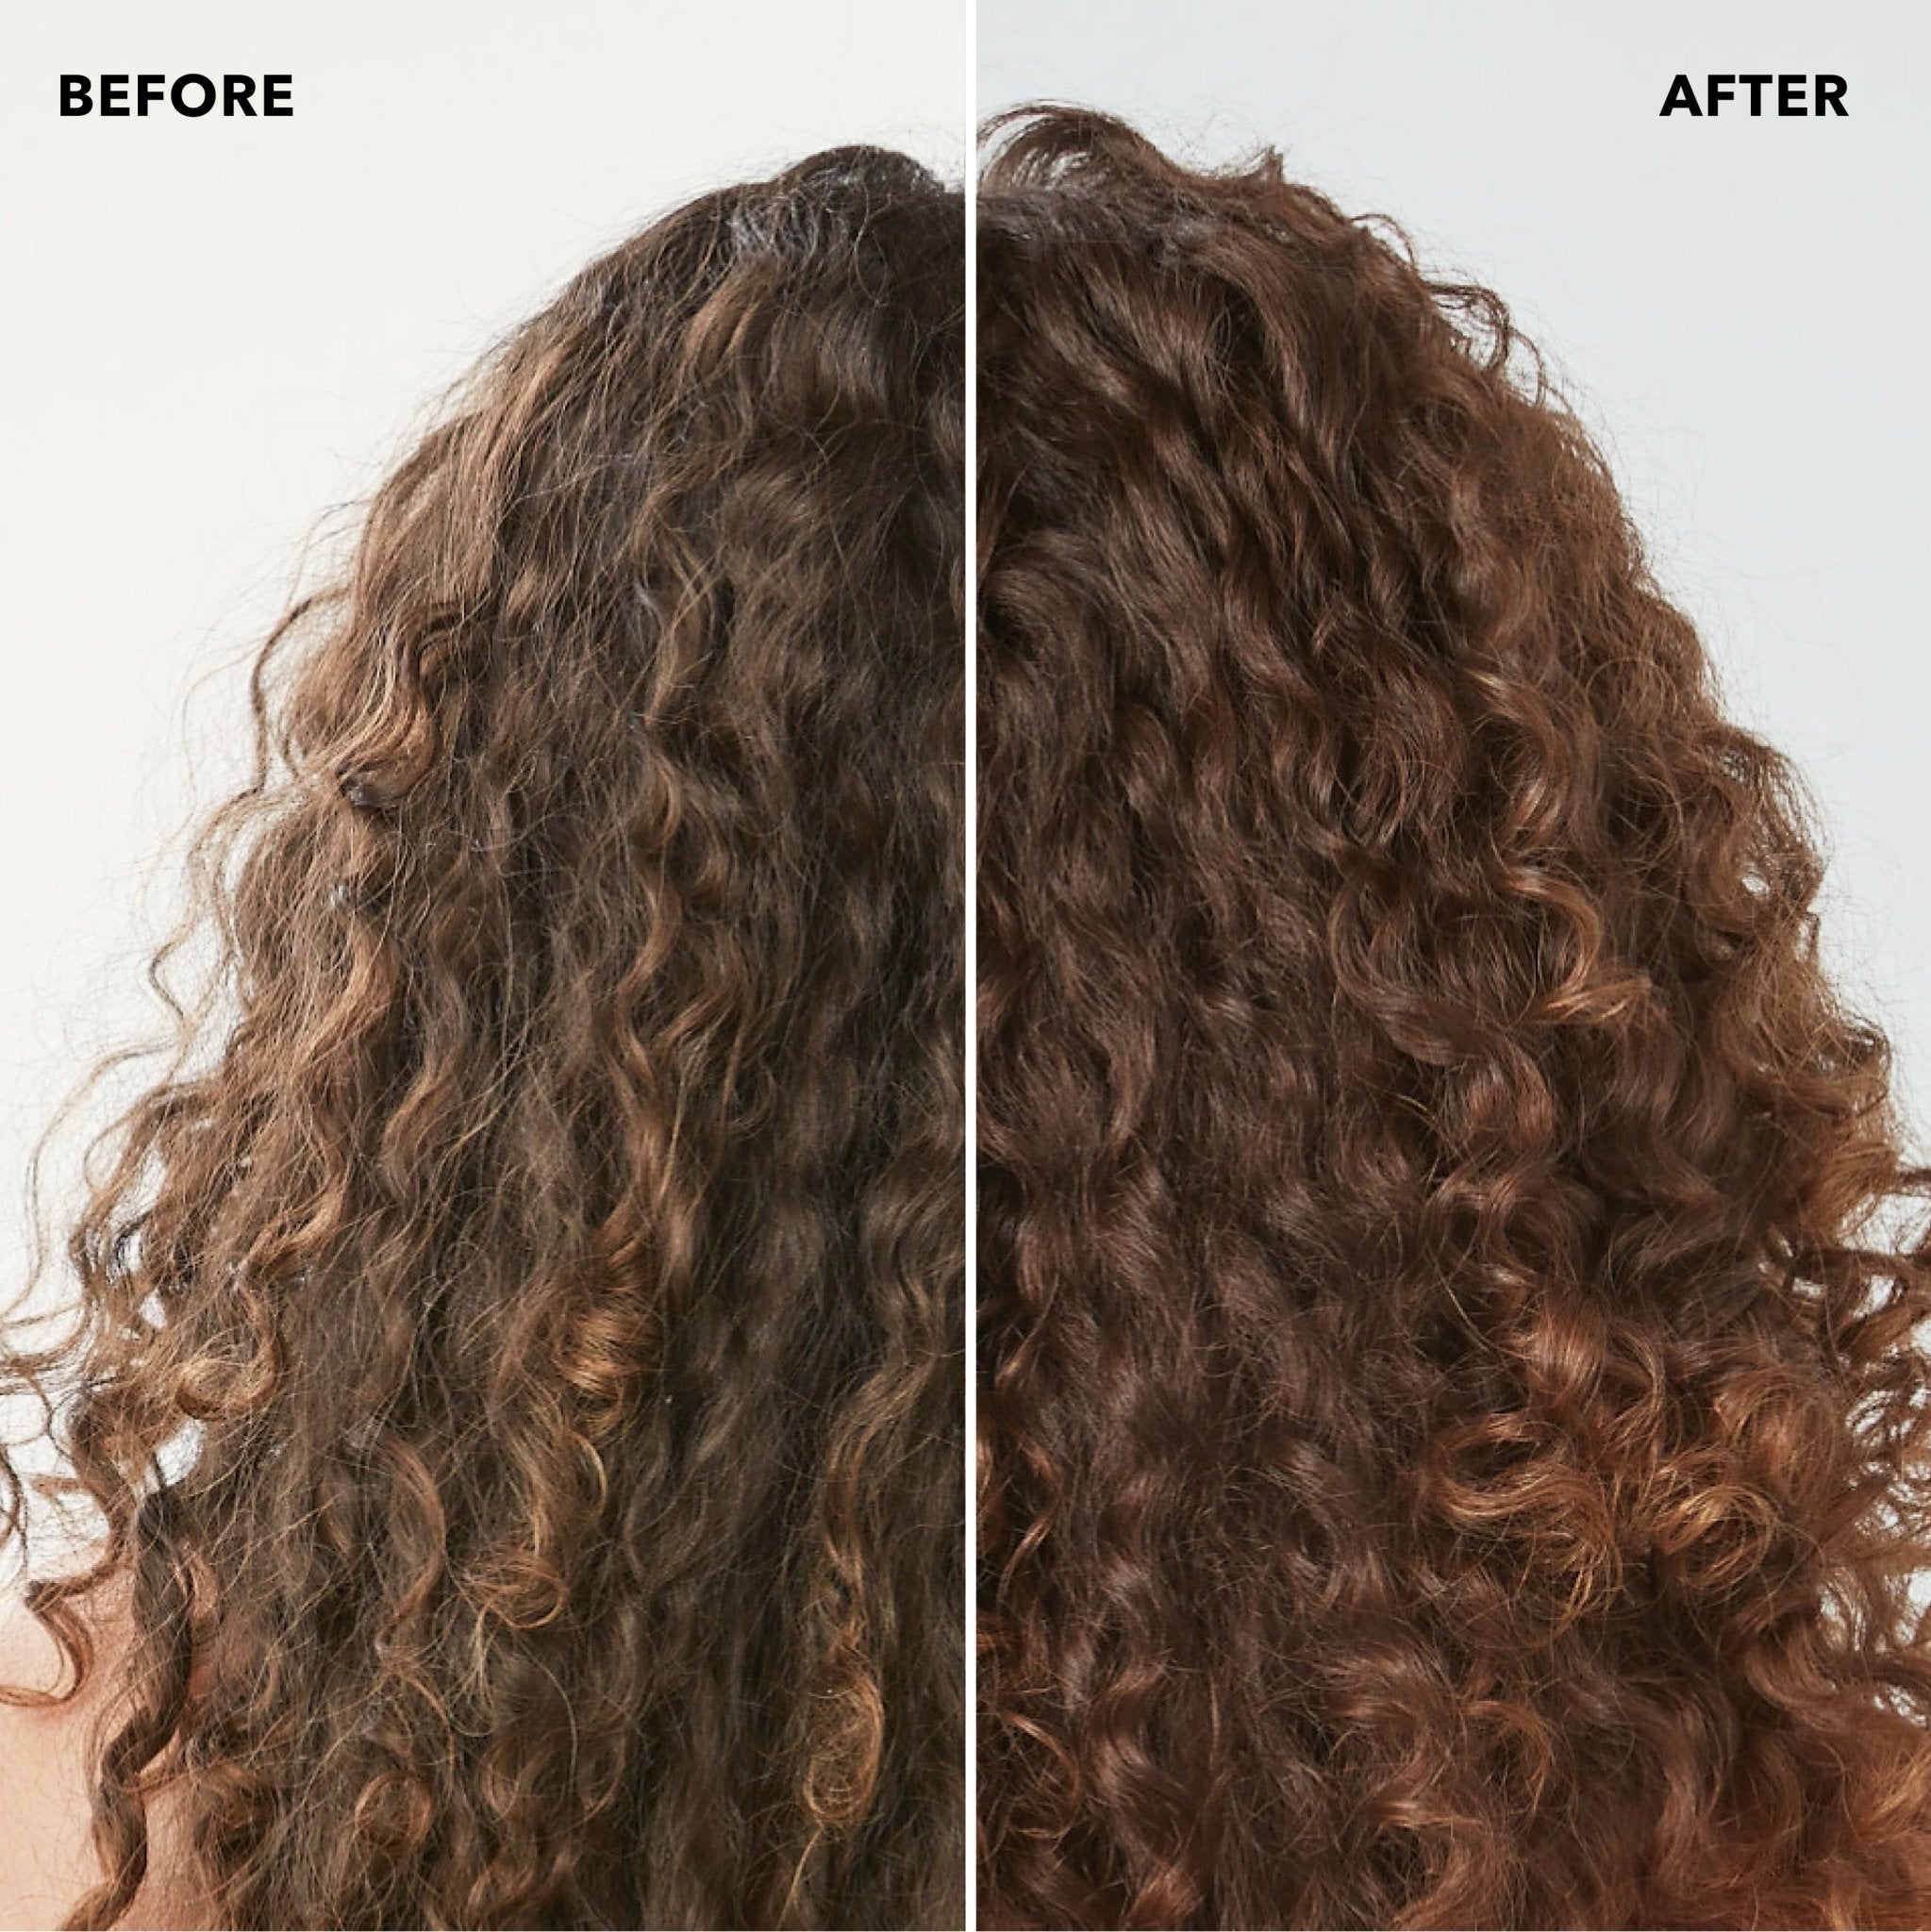 Curl Enhancing Leave-In Conditioner with Frizz-Resist Complex - SUNDAY II SUNDAY